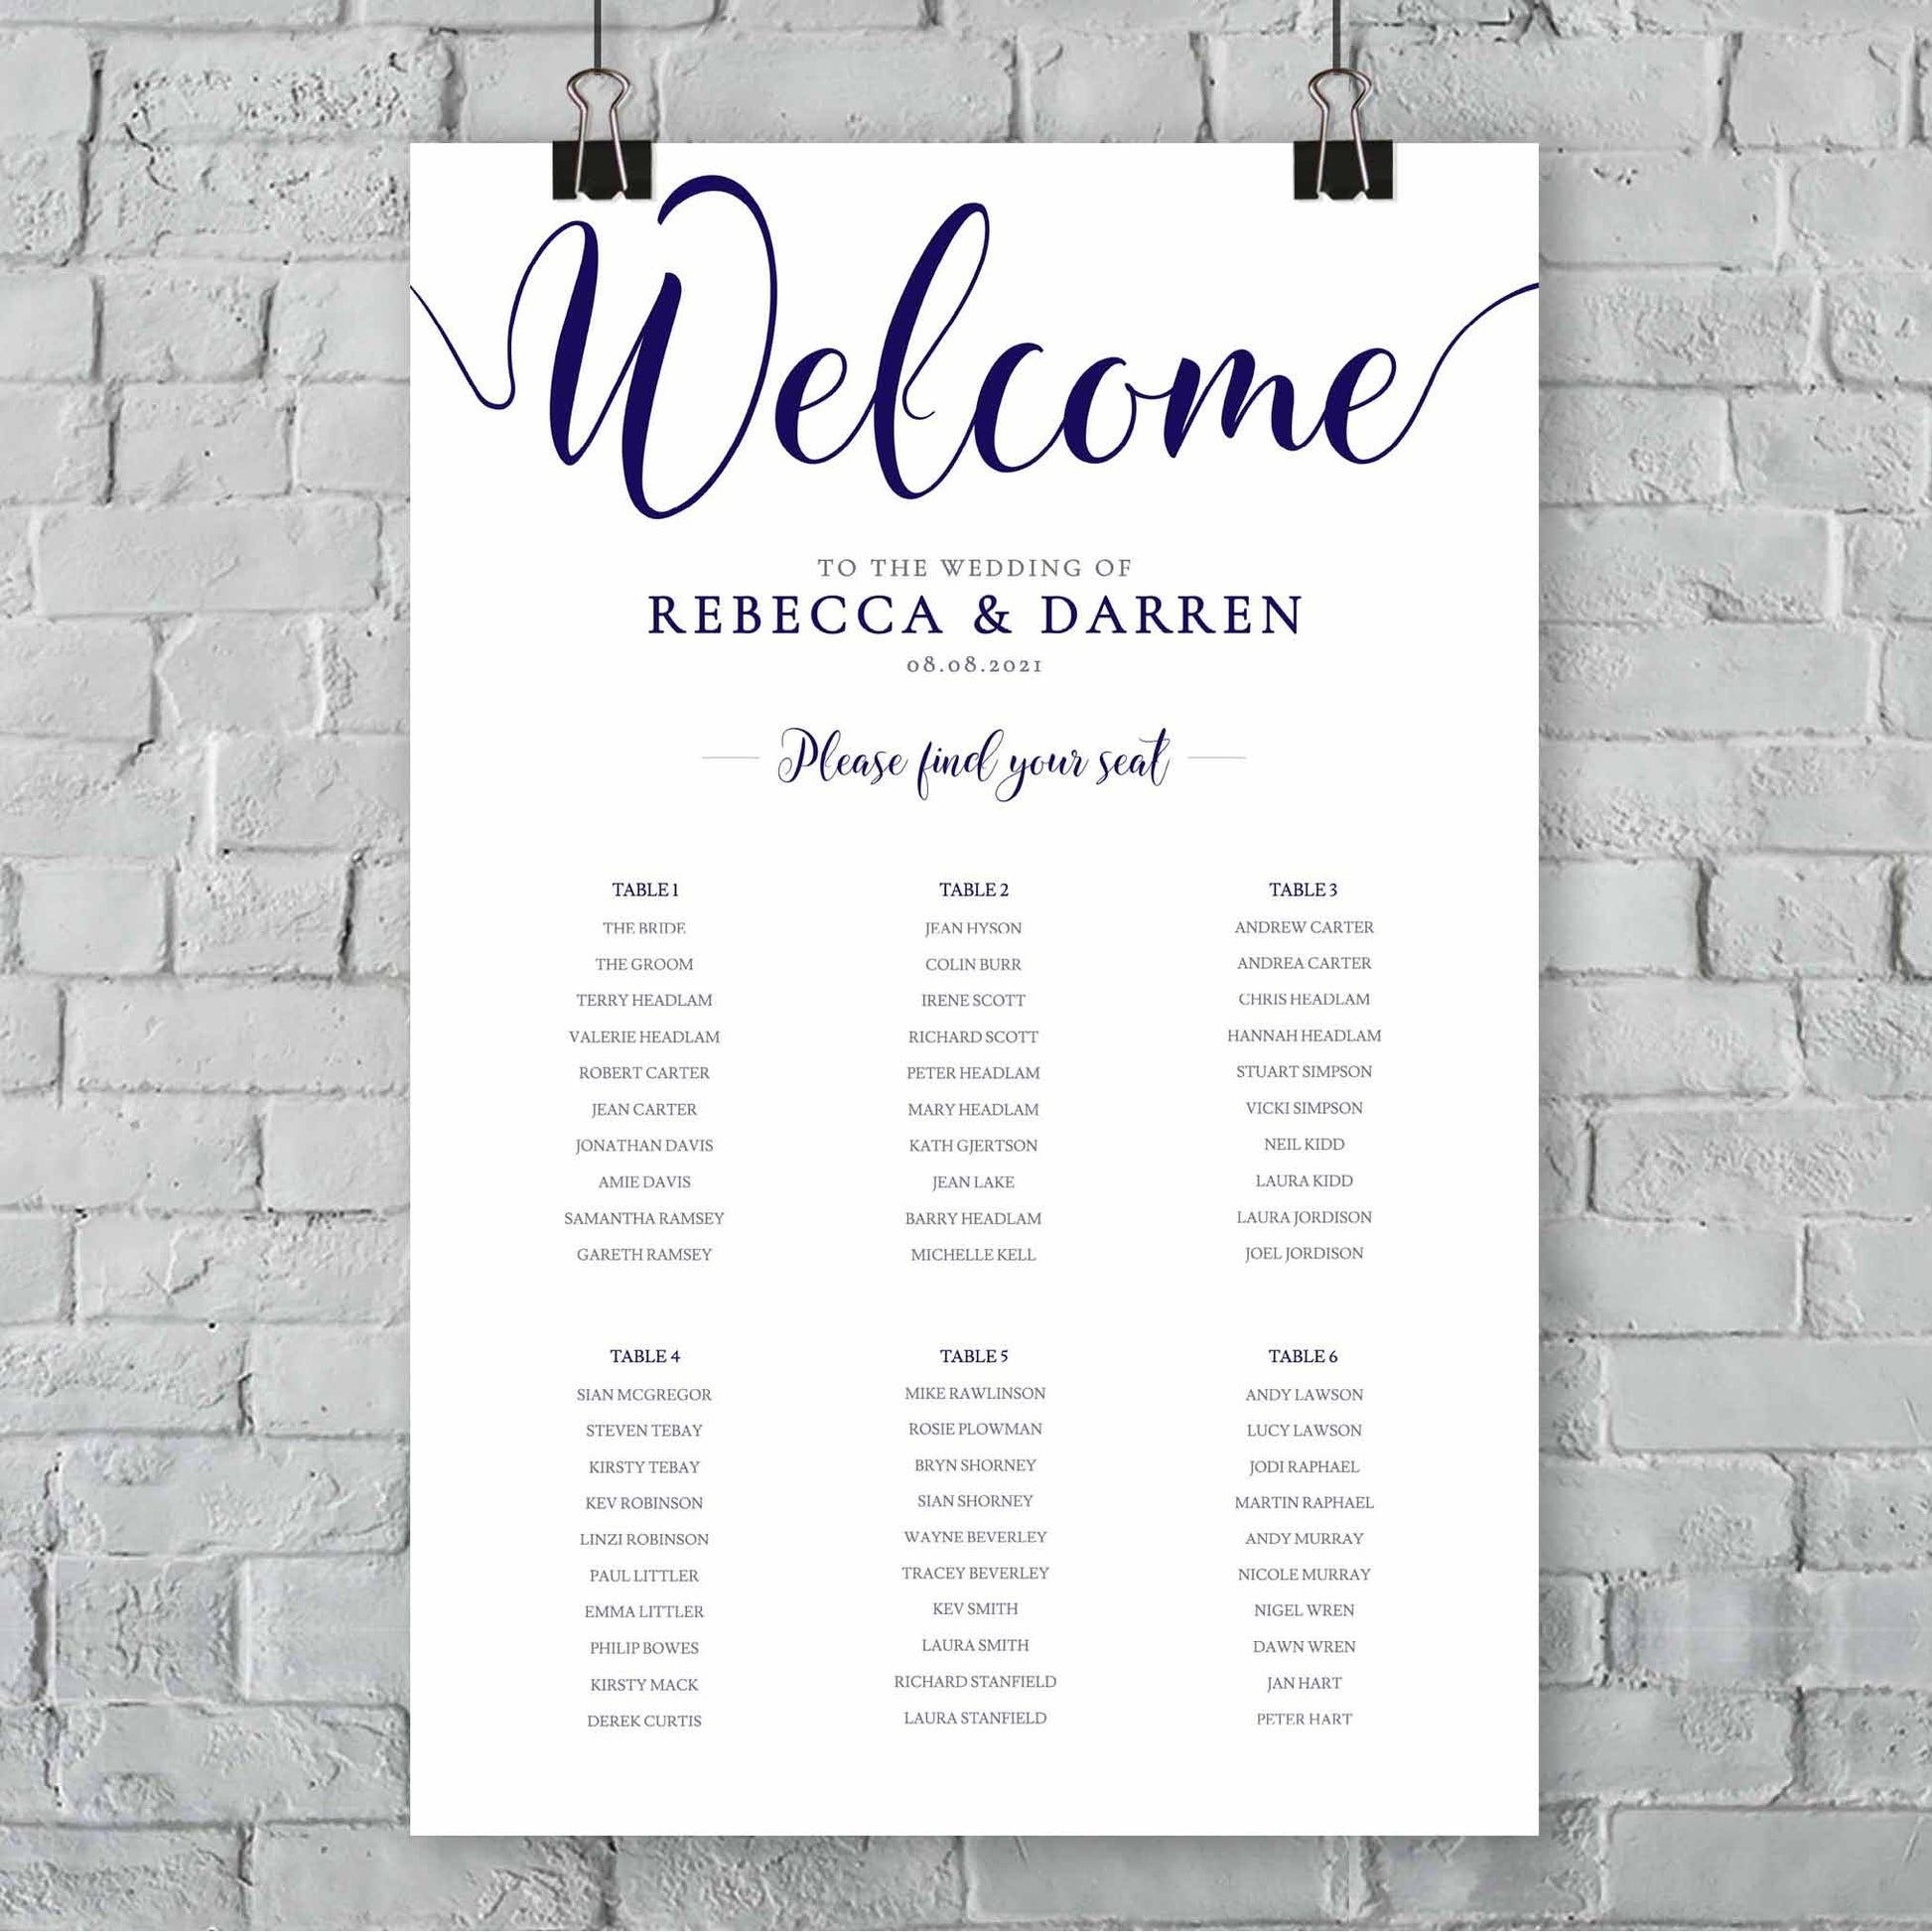 DIY wedding seating chart template with 6 tables in navy